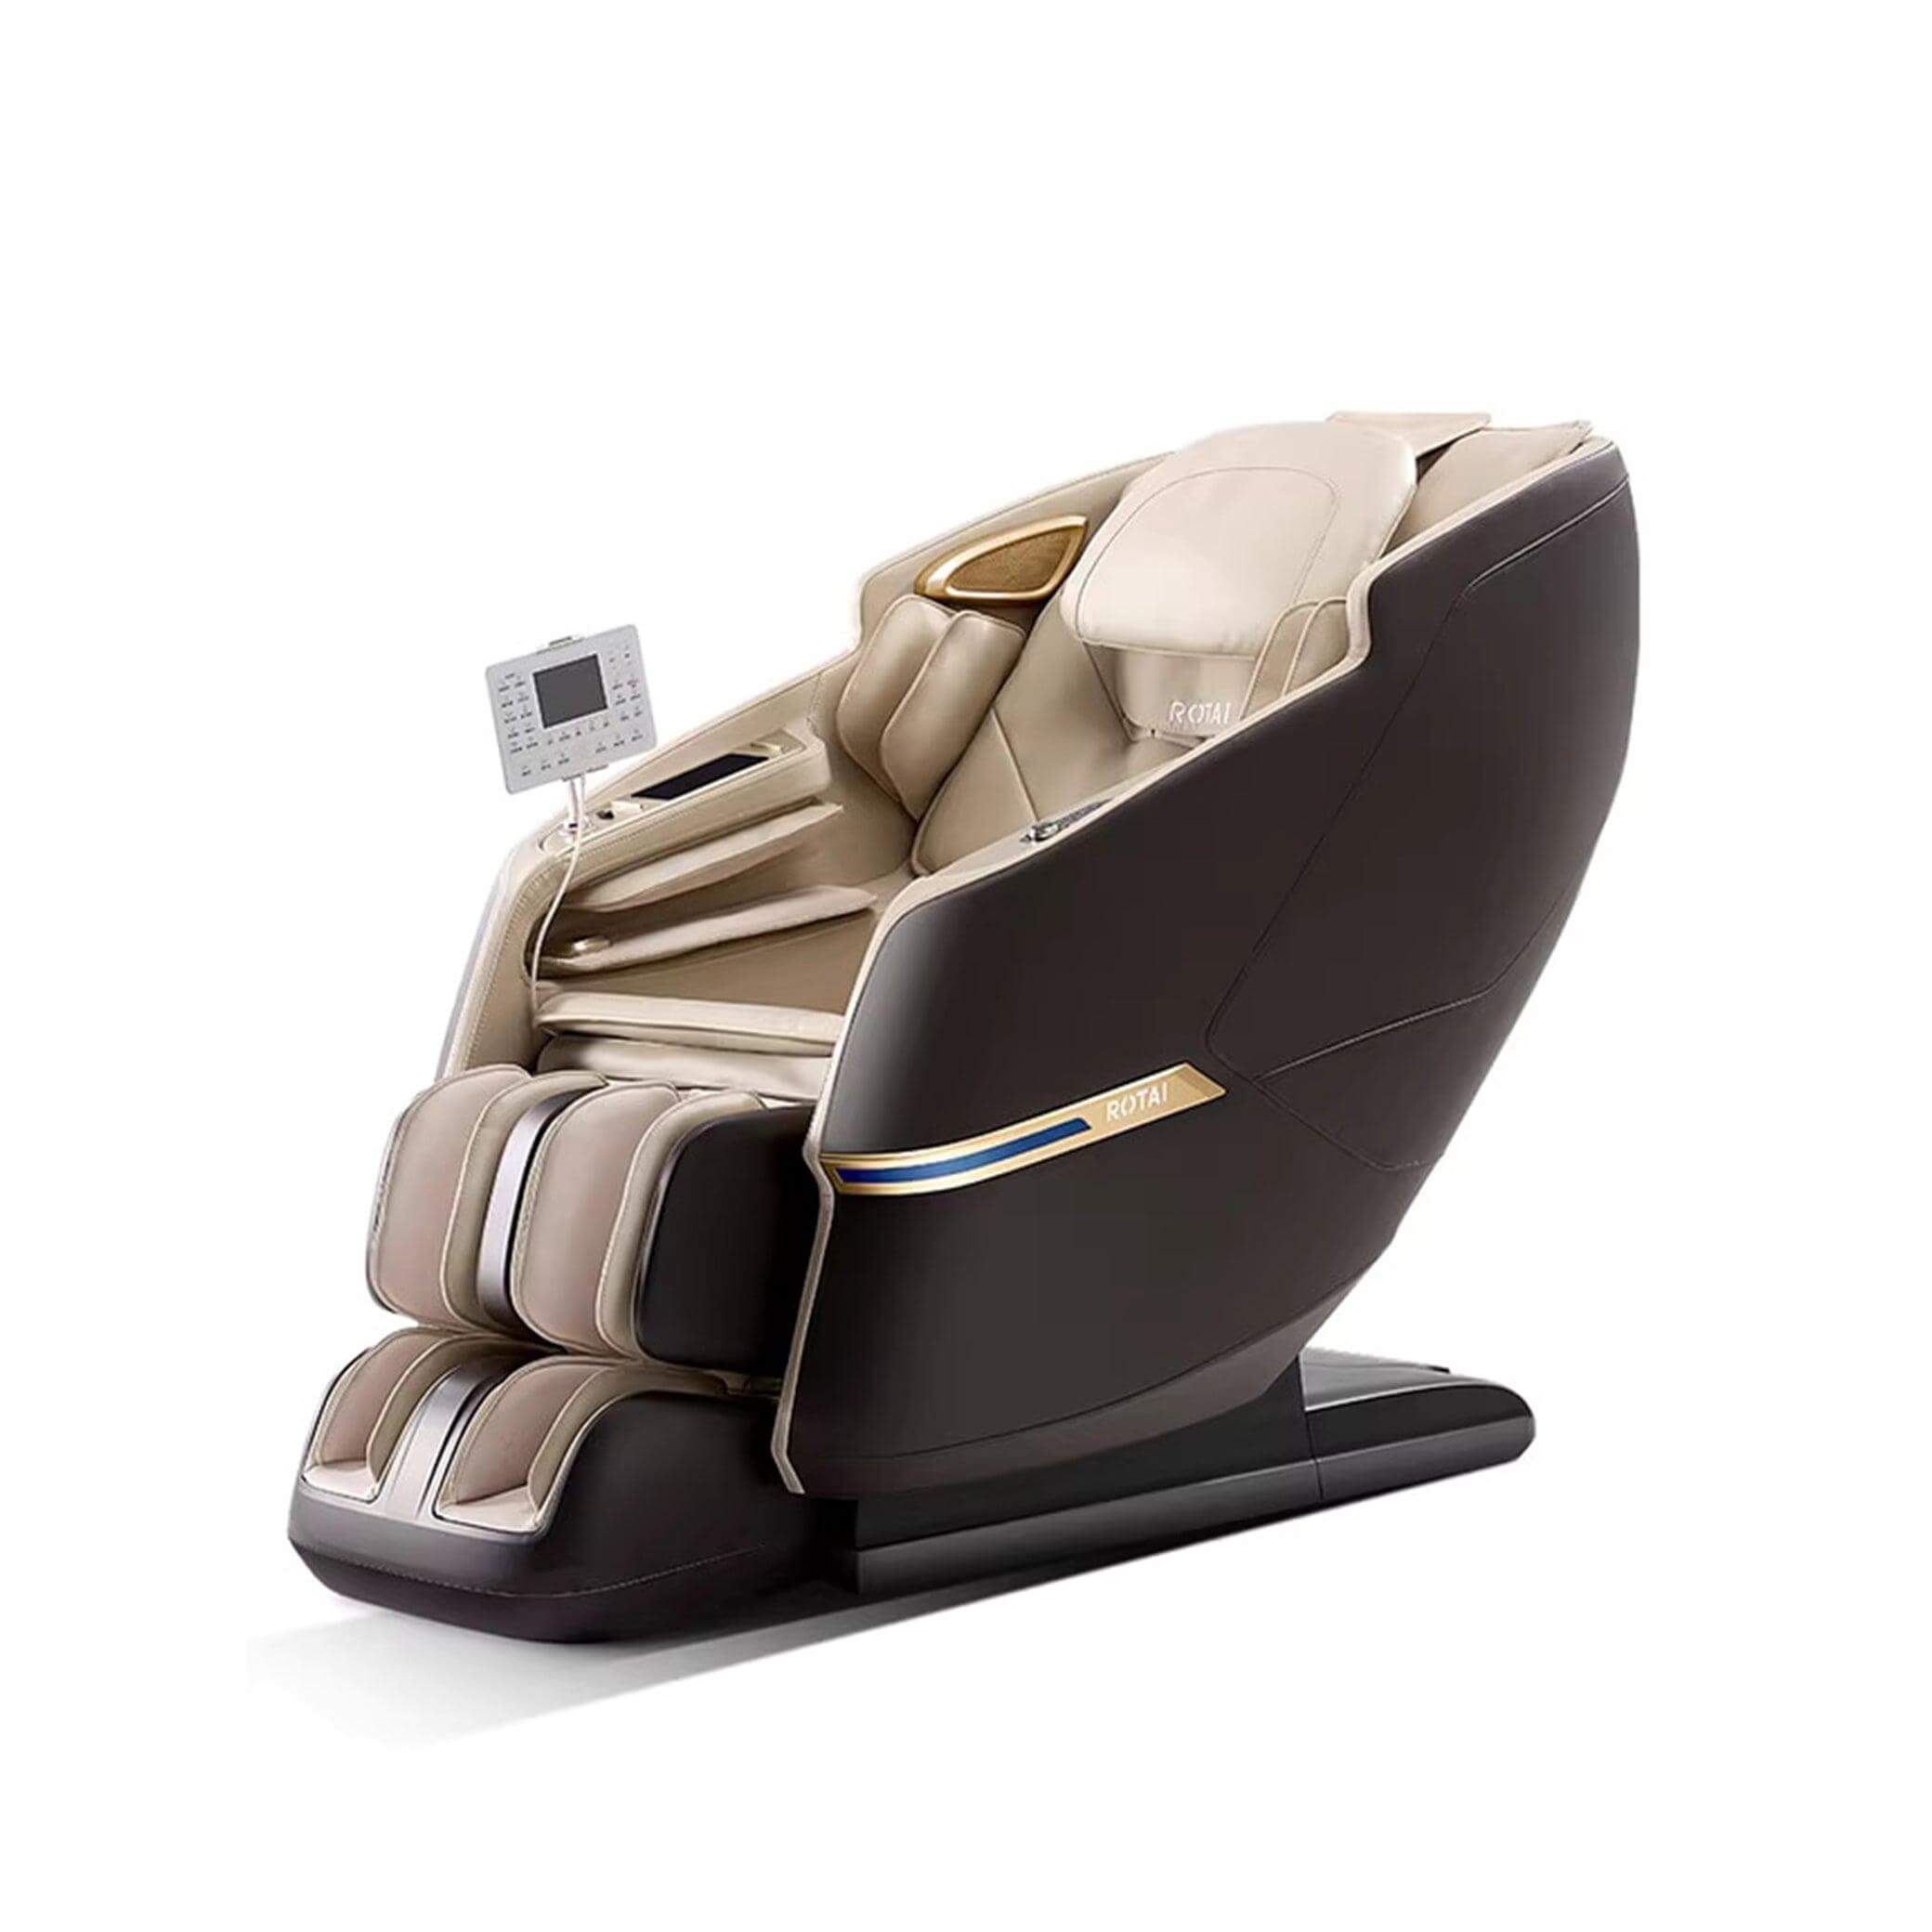 Best massage chair in UAE, Royal Magestic Pro Massage Chair in brown with 3D Movement and AI Smart Massage, available in Dubai massage chair showroom.